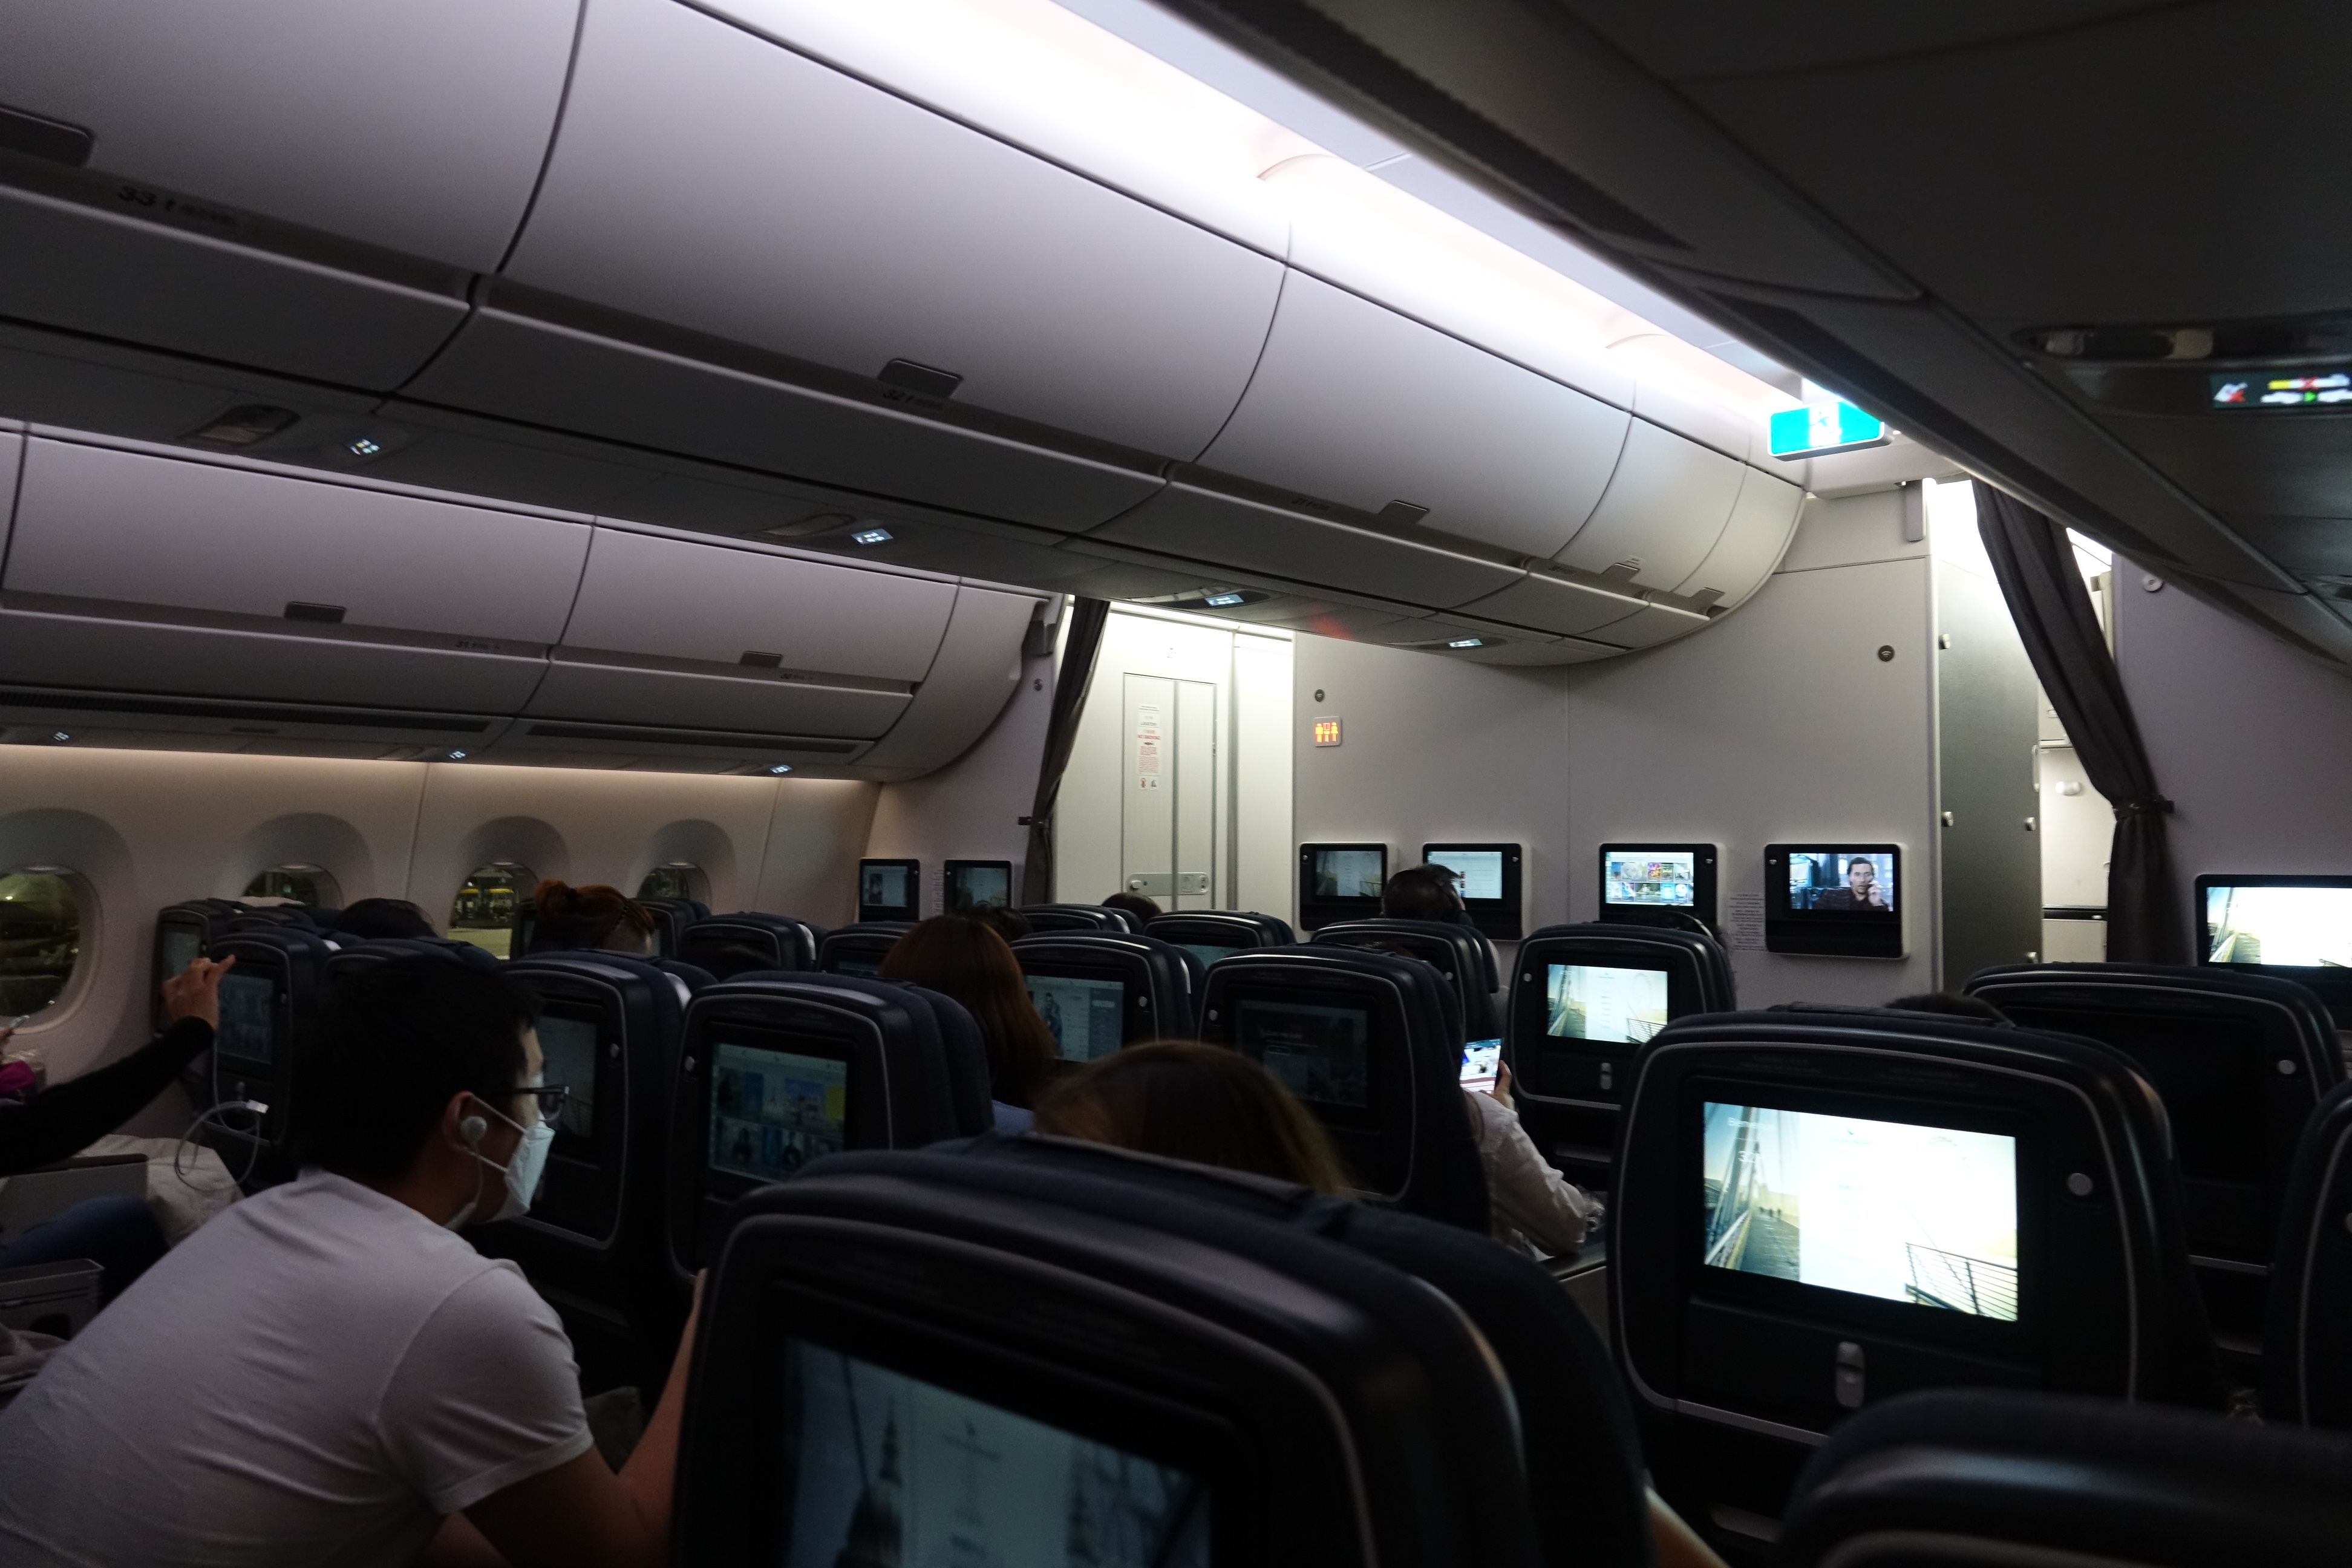 people sitting in an airplane with a group of people watching television